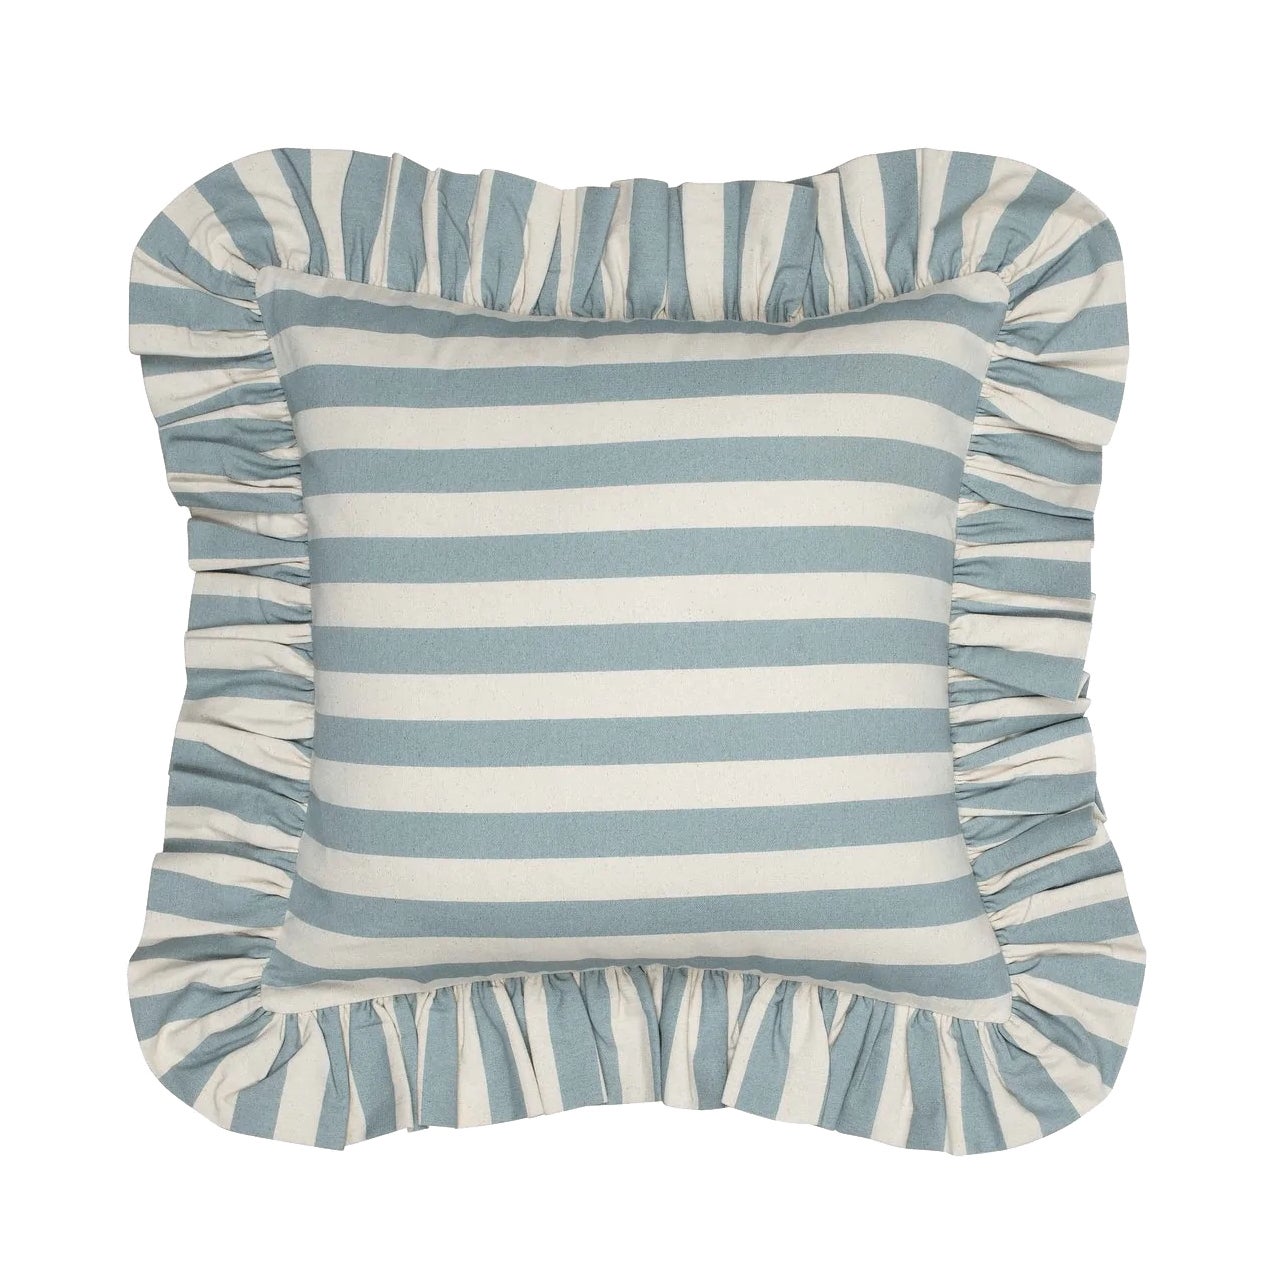 blue and white striped pillow with frilly edge